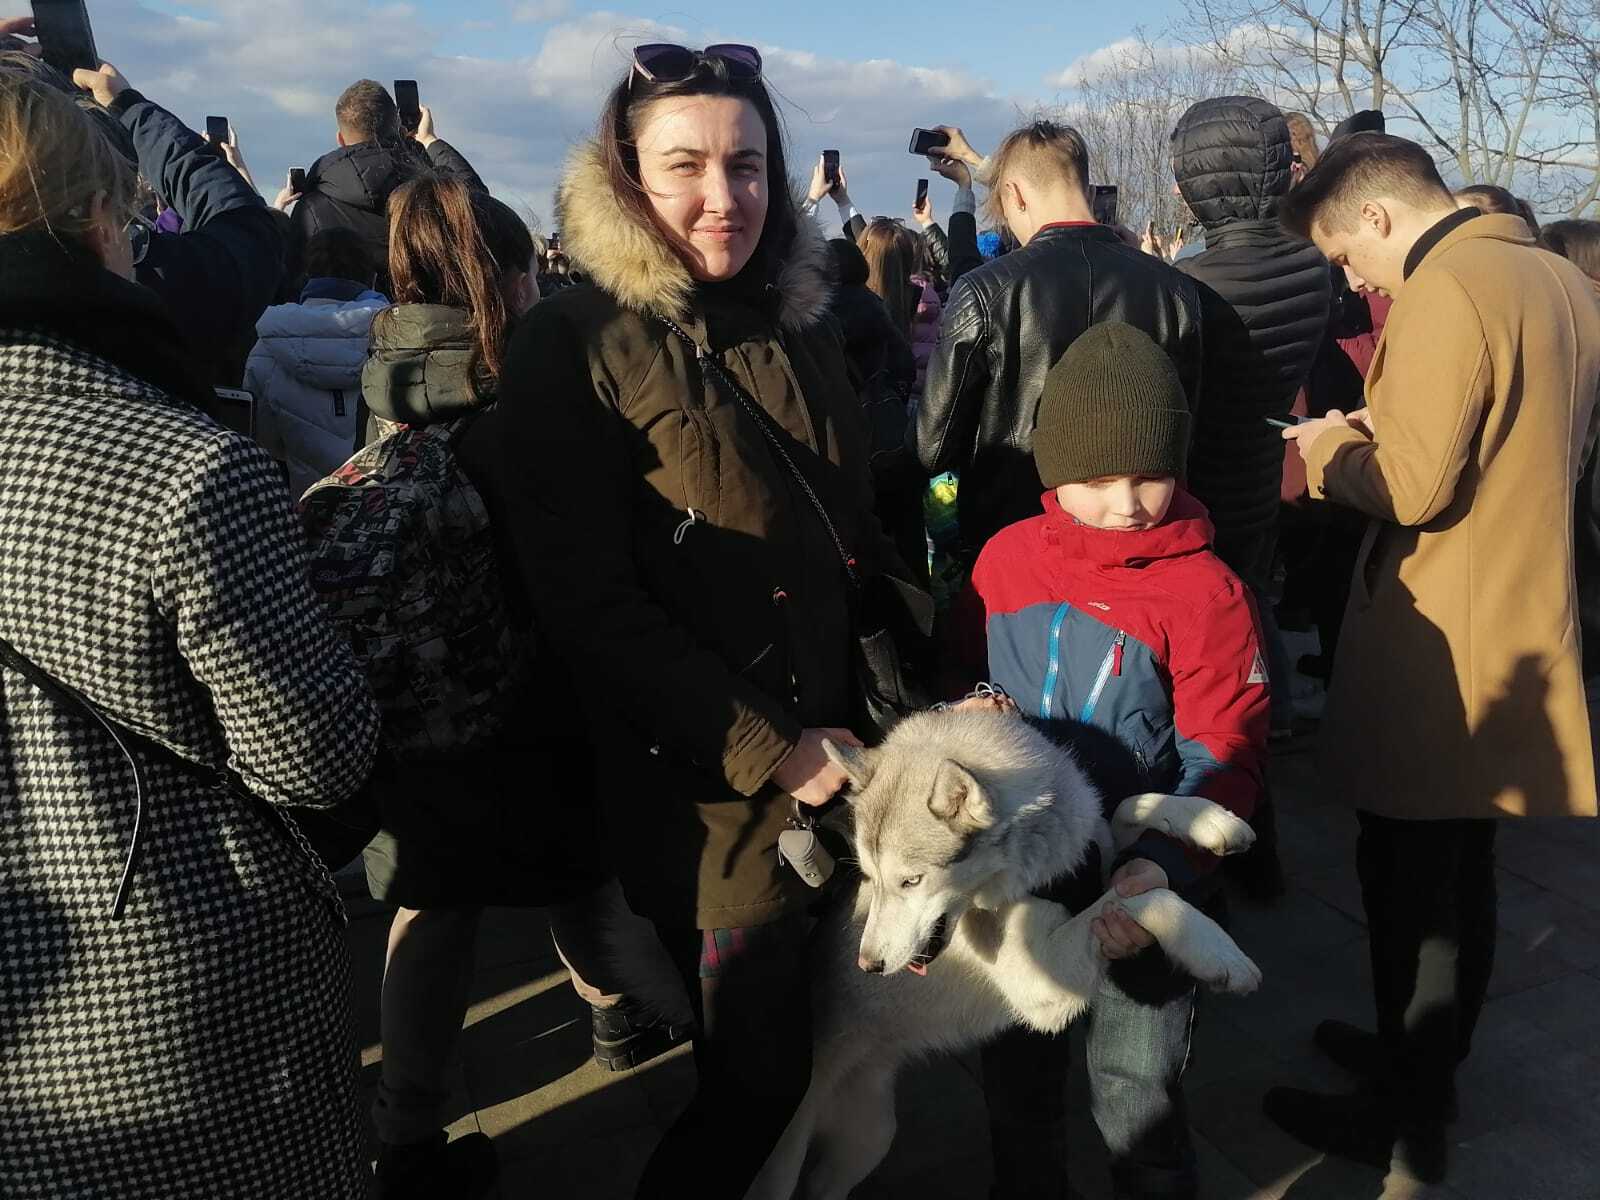 Ania Andriyashko, 33, came to the concert with her 8-year old son and their dog.